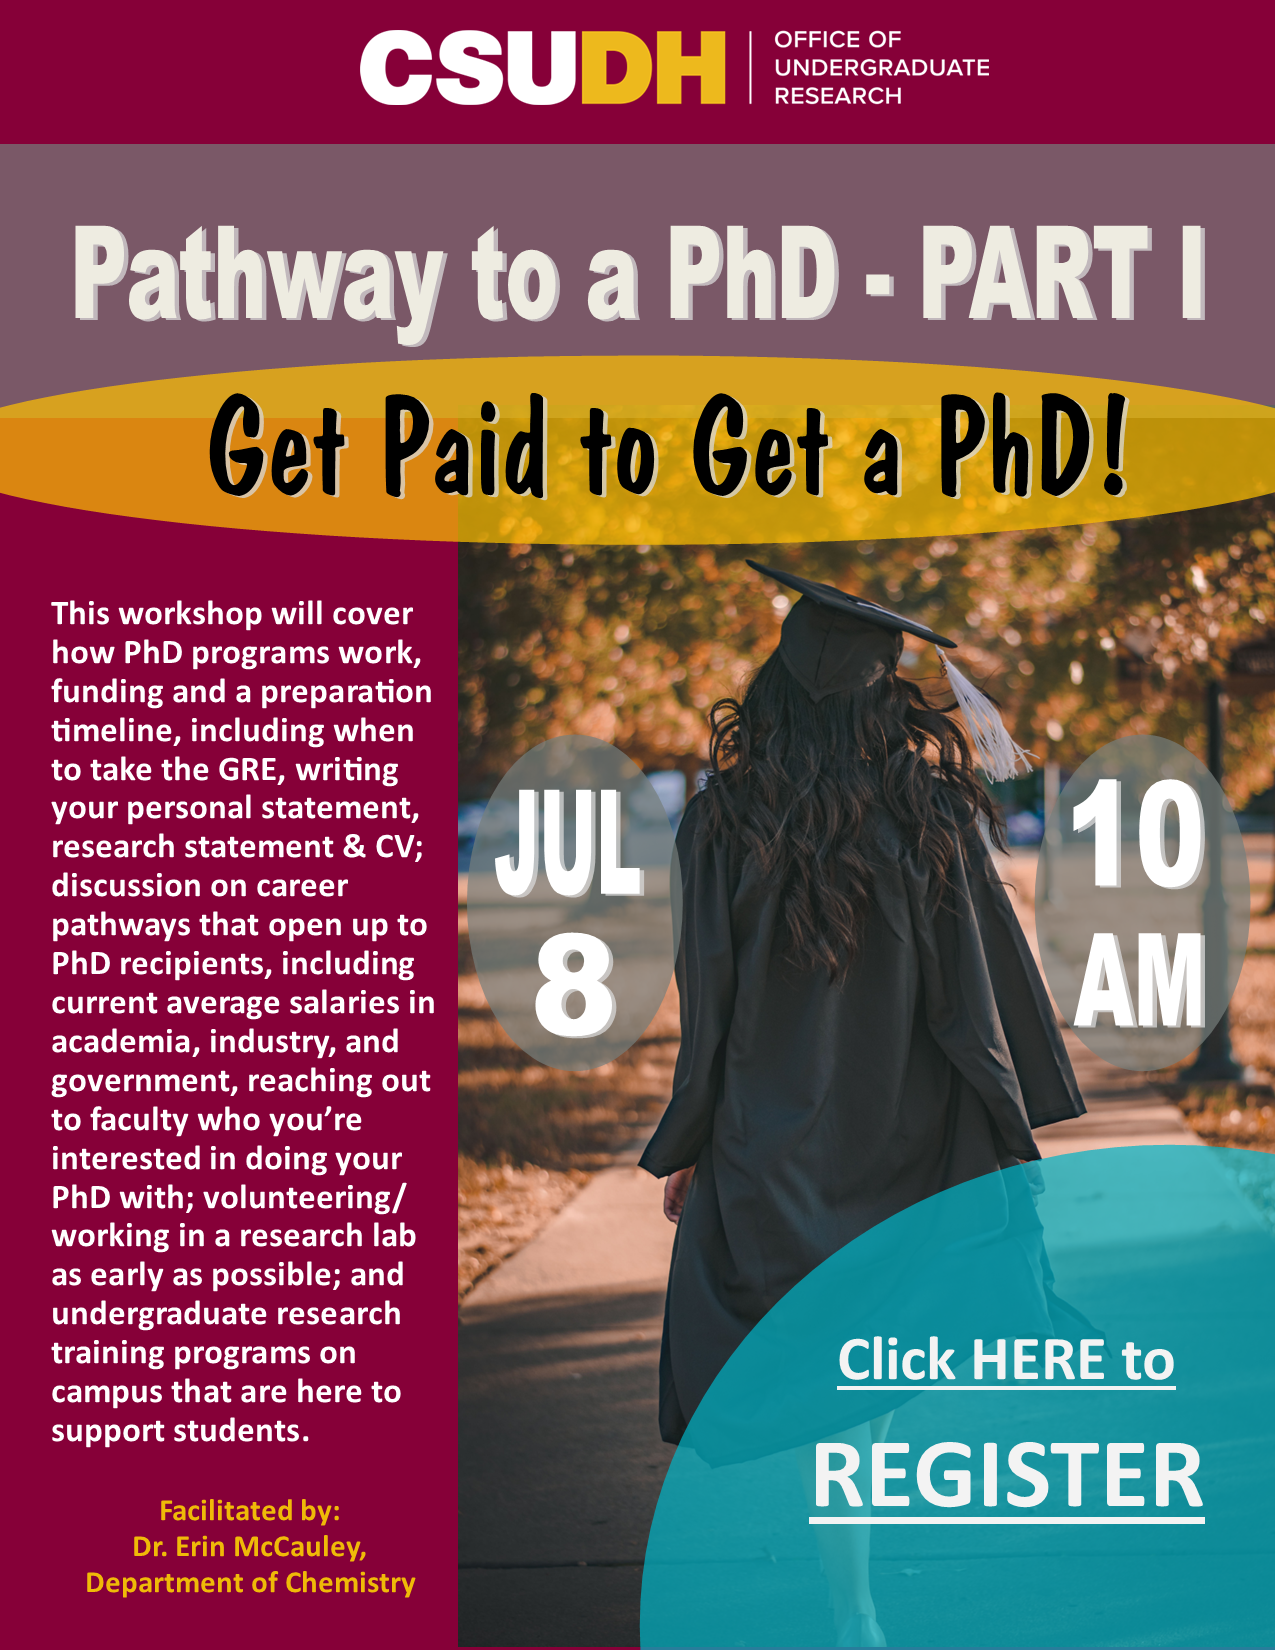 Pathway to PhD Part 1